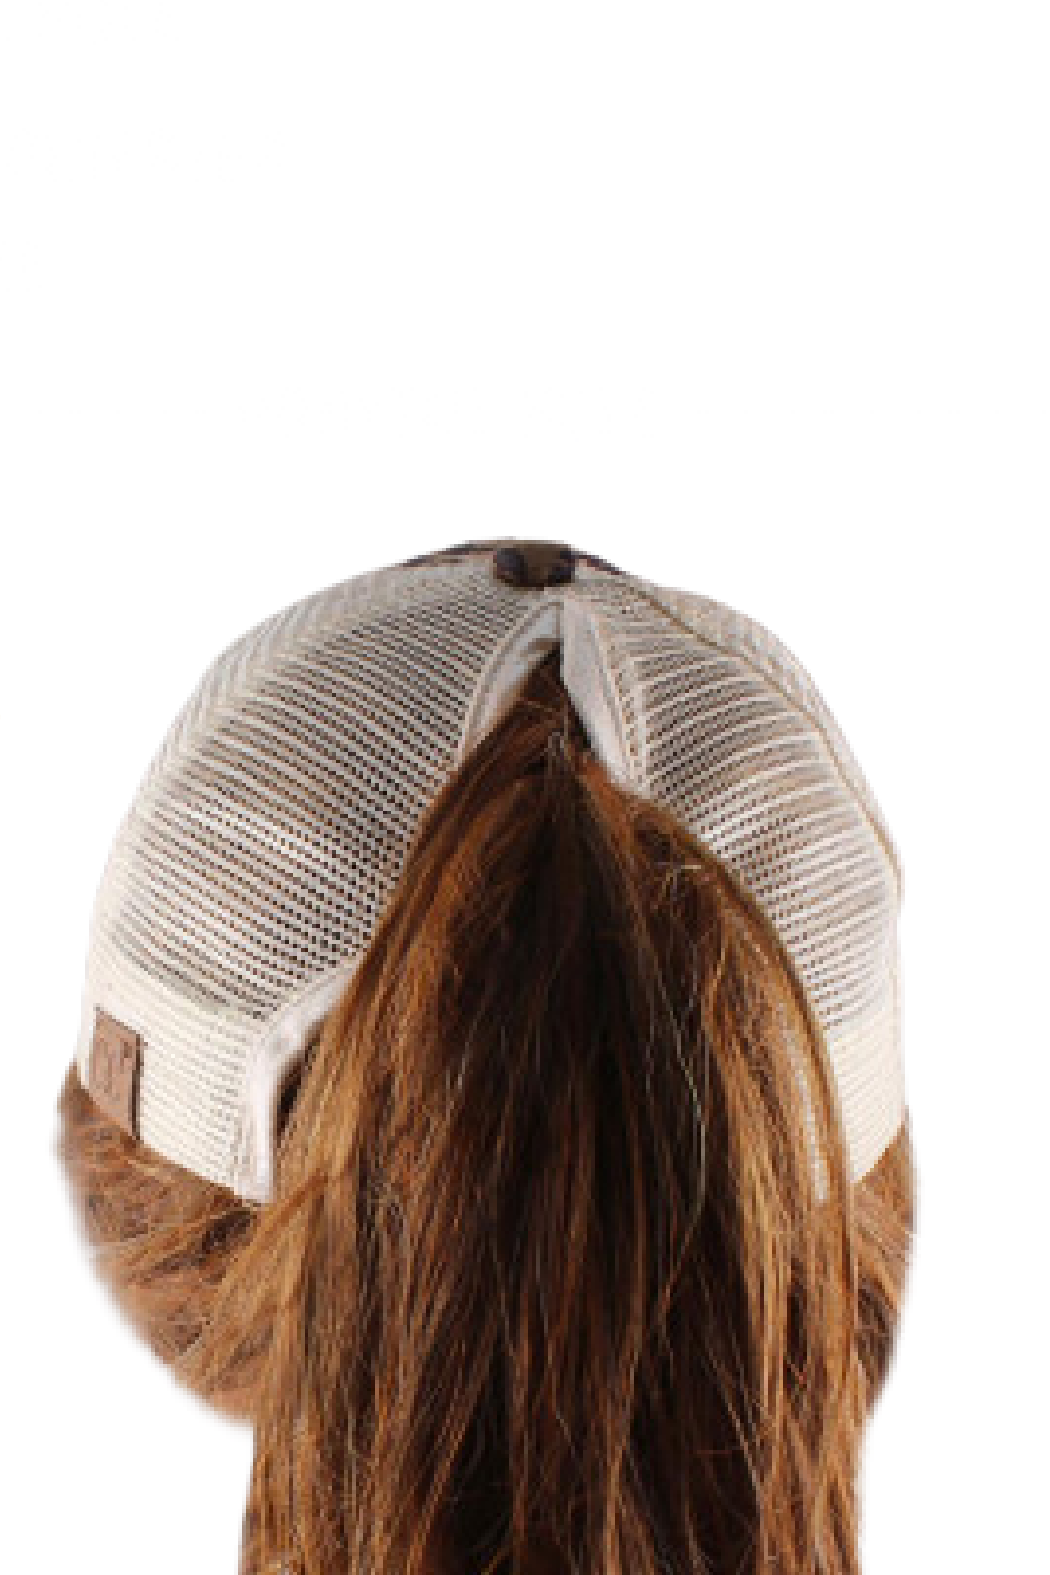 Embellish Your Life - Upcycled Leopard Criss-Cross Ponytail Cap